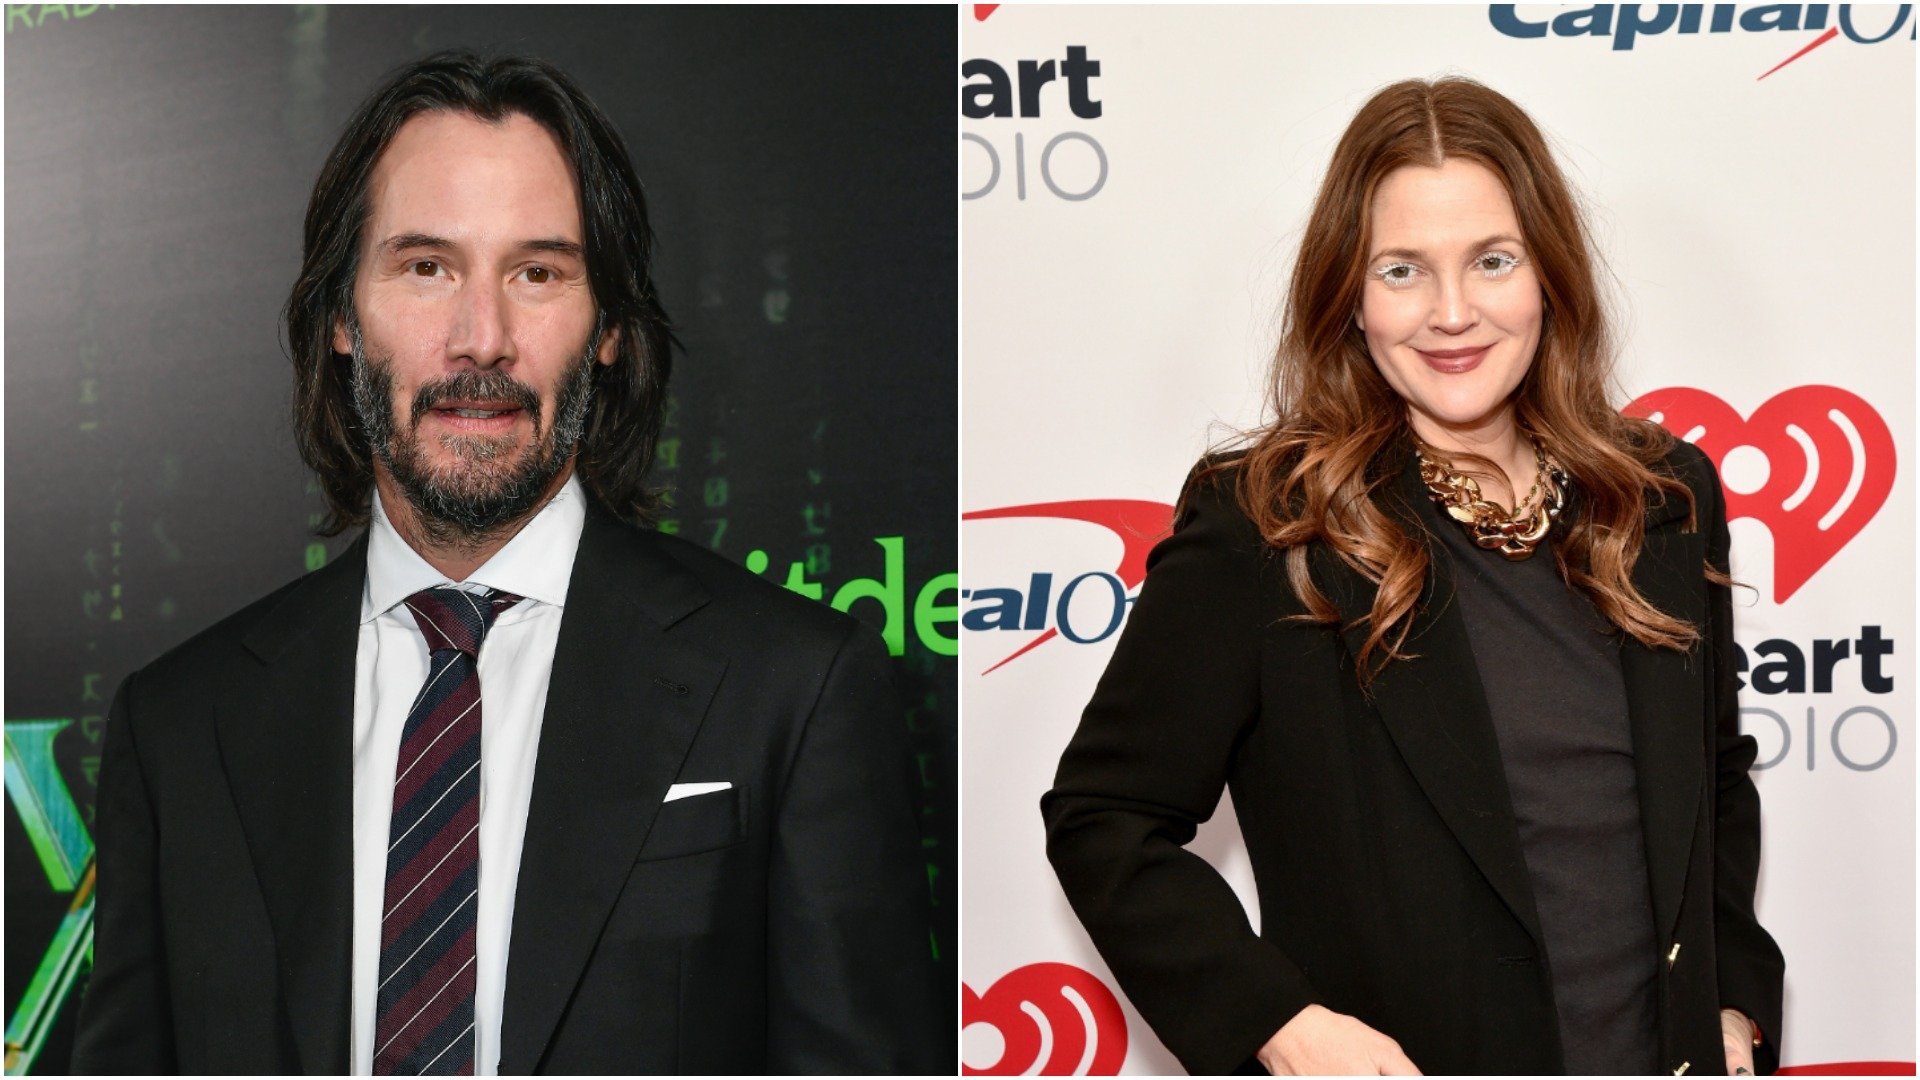 Keanu Reeves attends The Matrix Resurrections red carpet/ Drew Barrymore attends iHeartRadio Z100 Jingle Ball 2021 